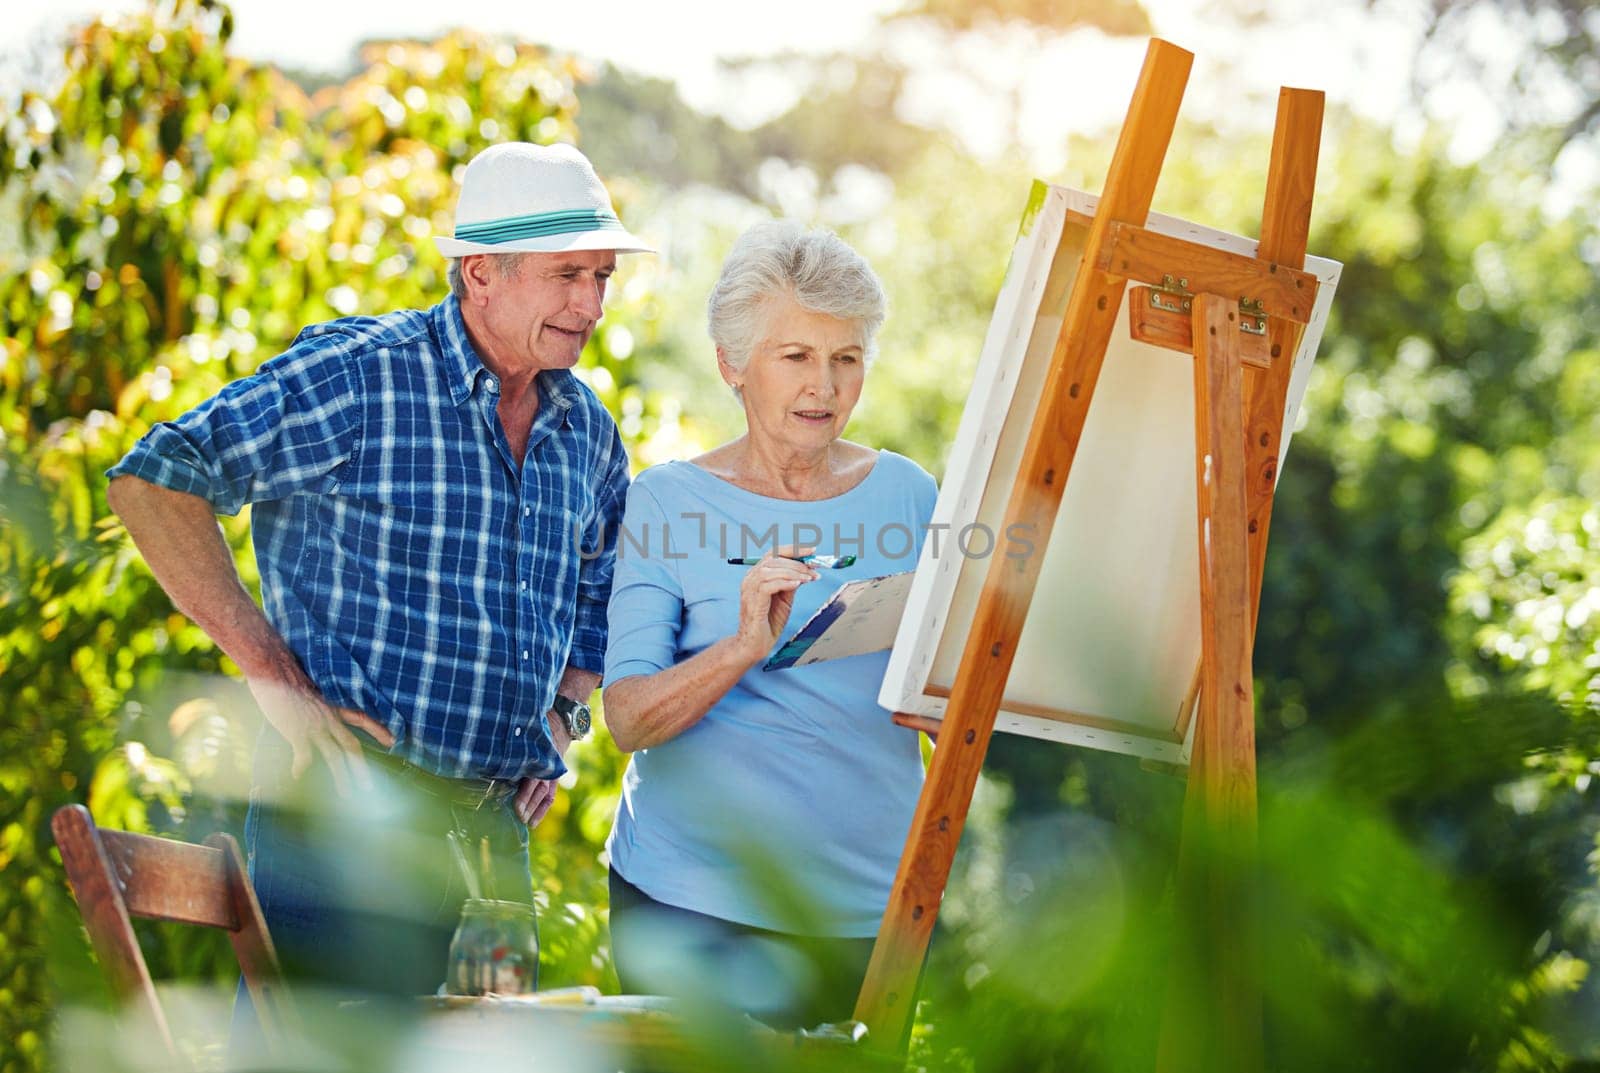 Her painting will be perfect. a senior couple painting in the park